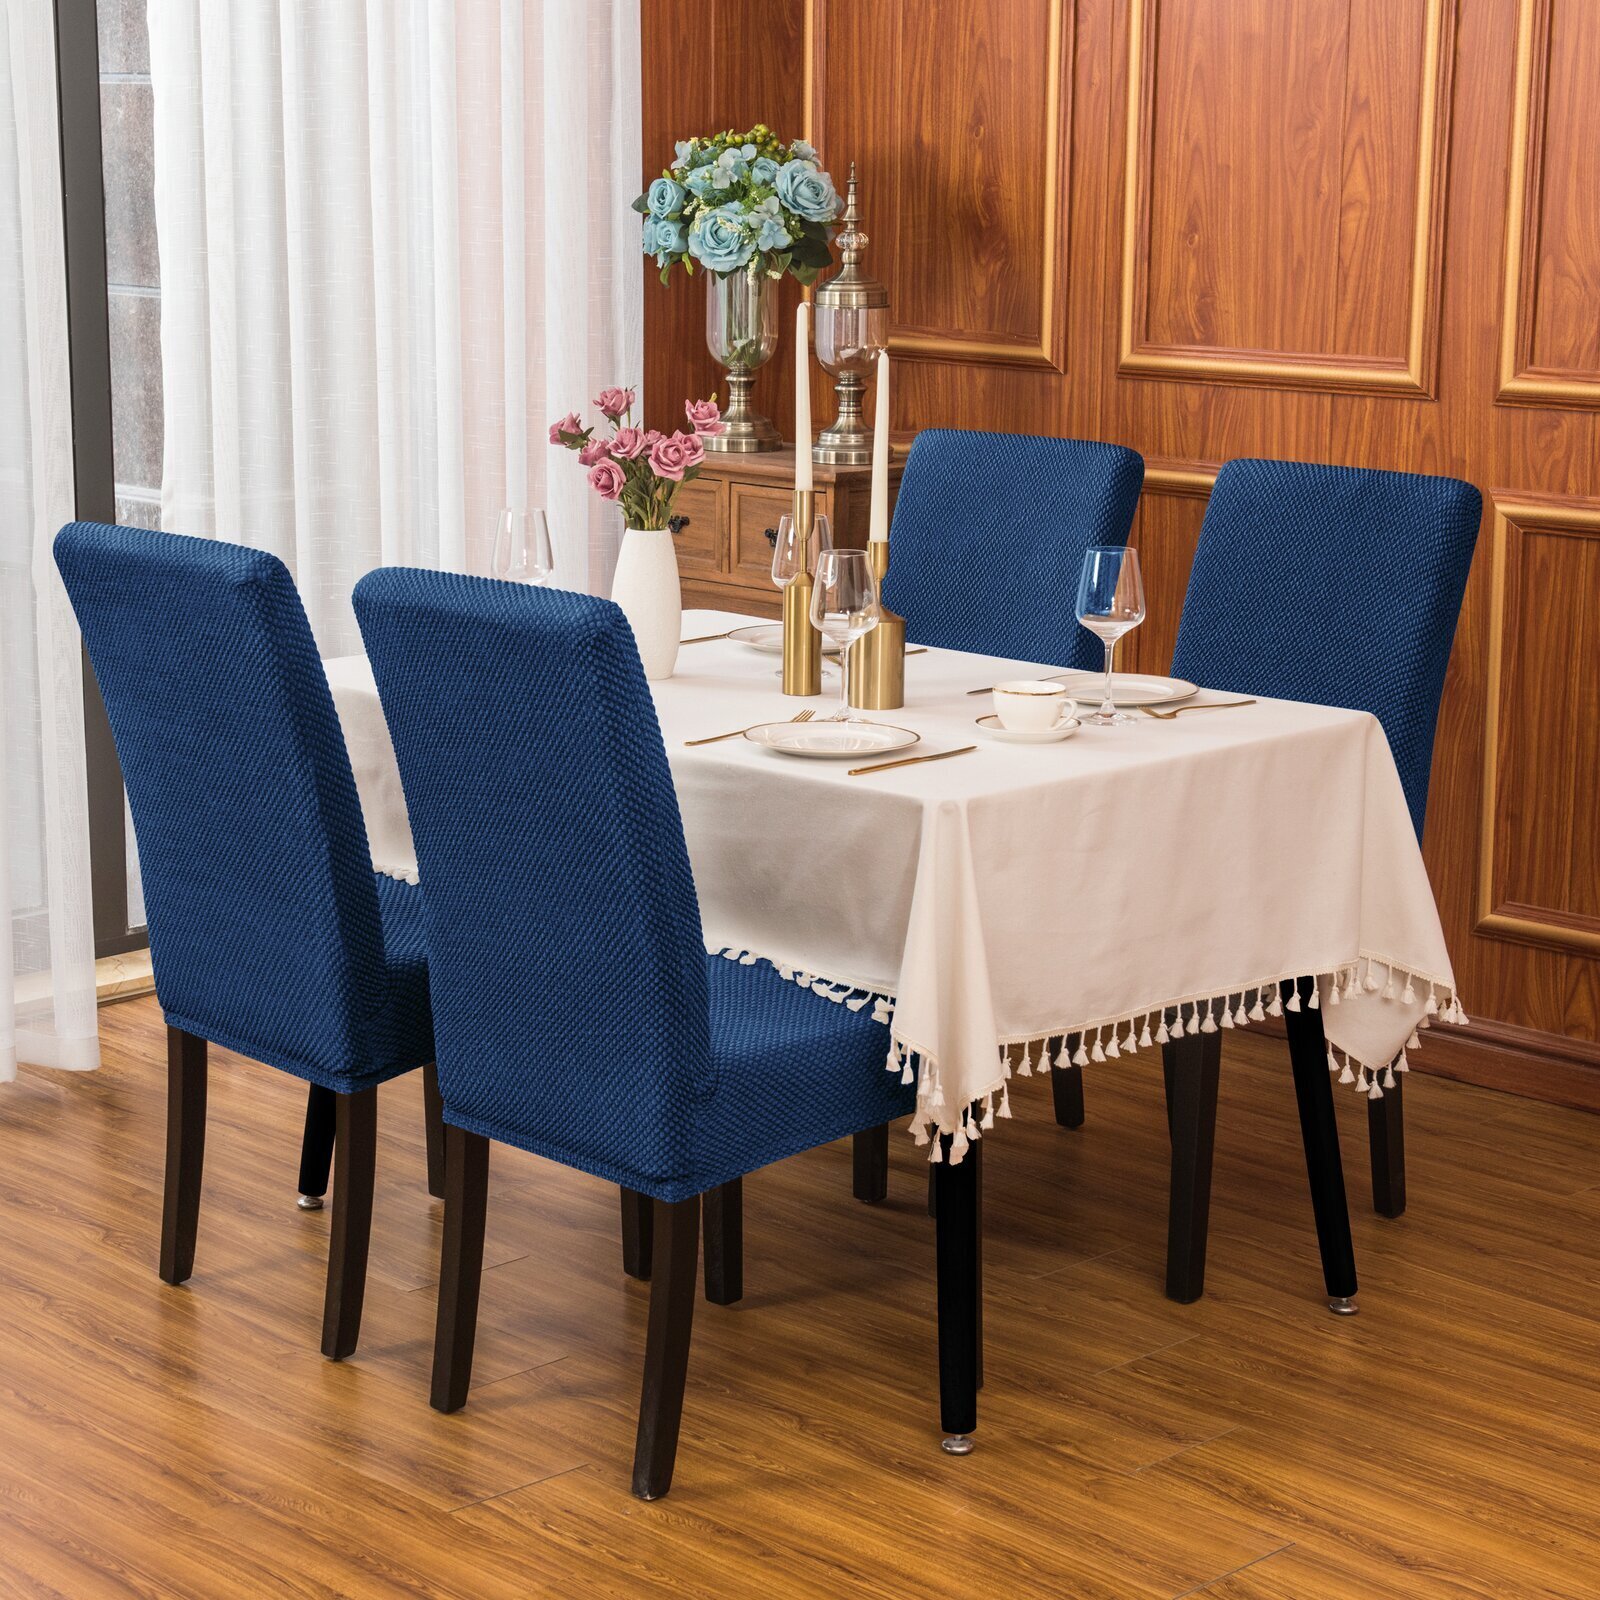 Textured Dining Chair Slipcovers